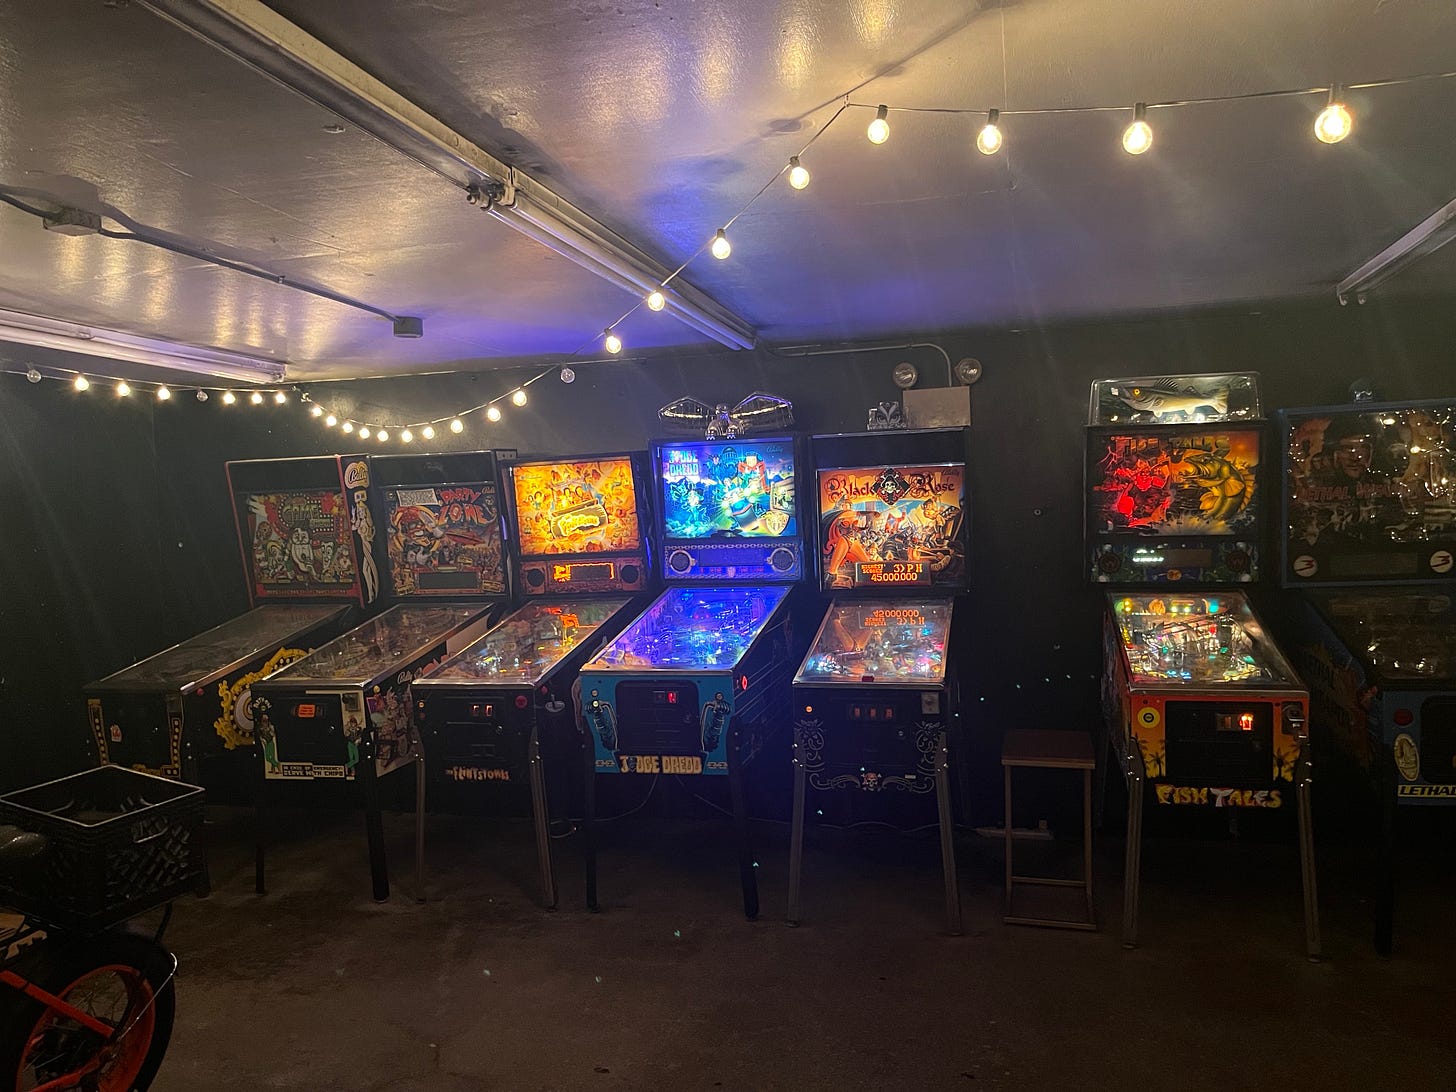 A row of seven different pinball machines.